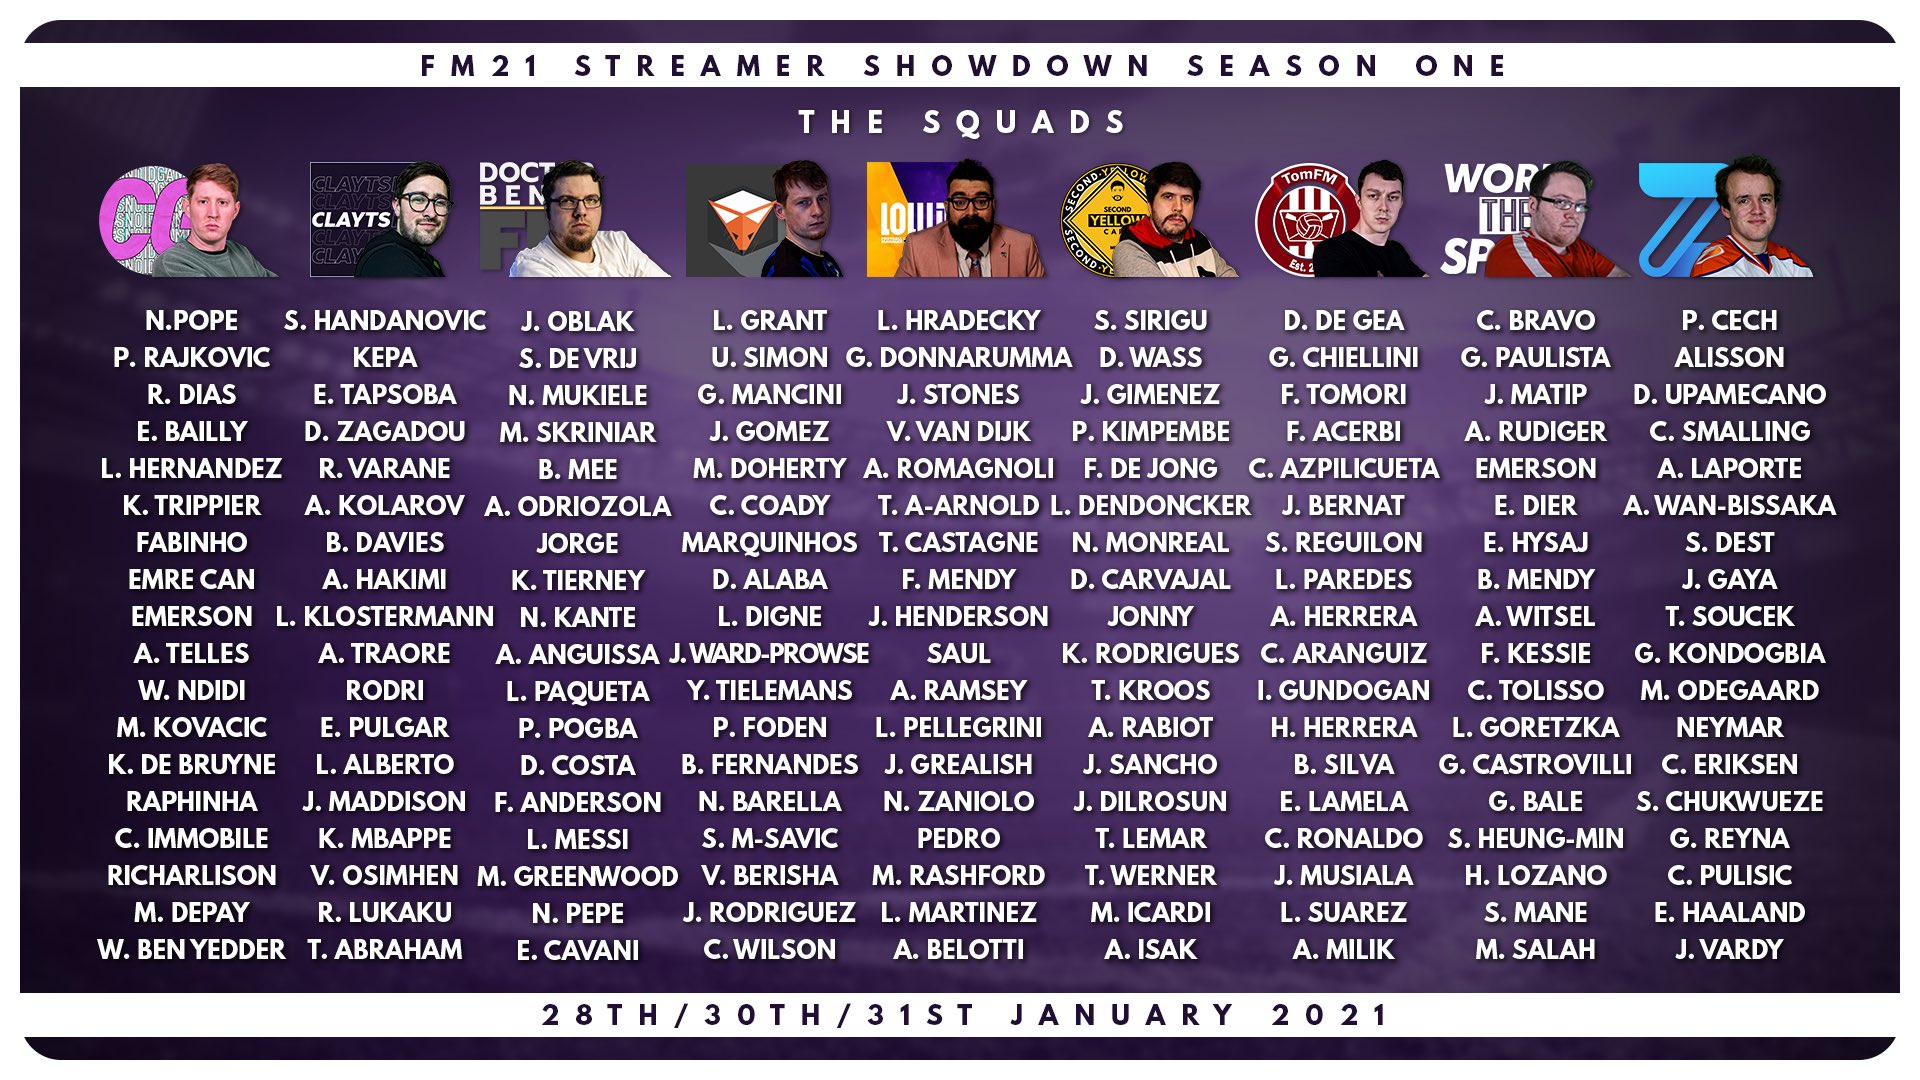 Beschikbaar Centraliseren Begin FM Streamer Showdown on Twitter: "Good morning, last night was fun, wasn't  it? The squads are in, the database is built, but who will be victorious in  this weekend's #FMStreamerShowdown? #FM21 | @